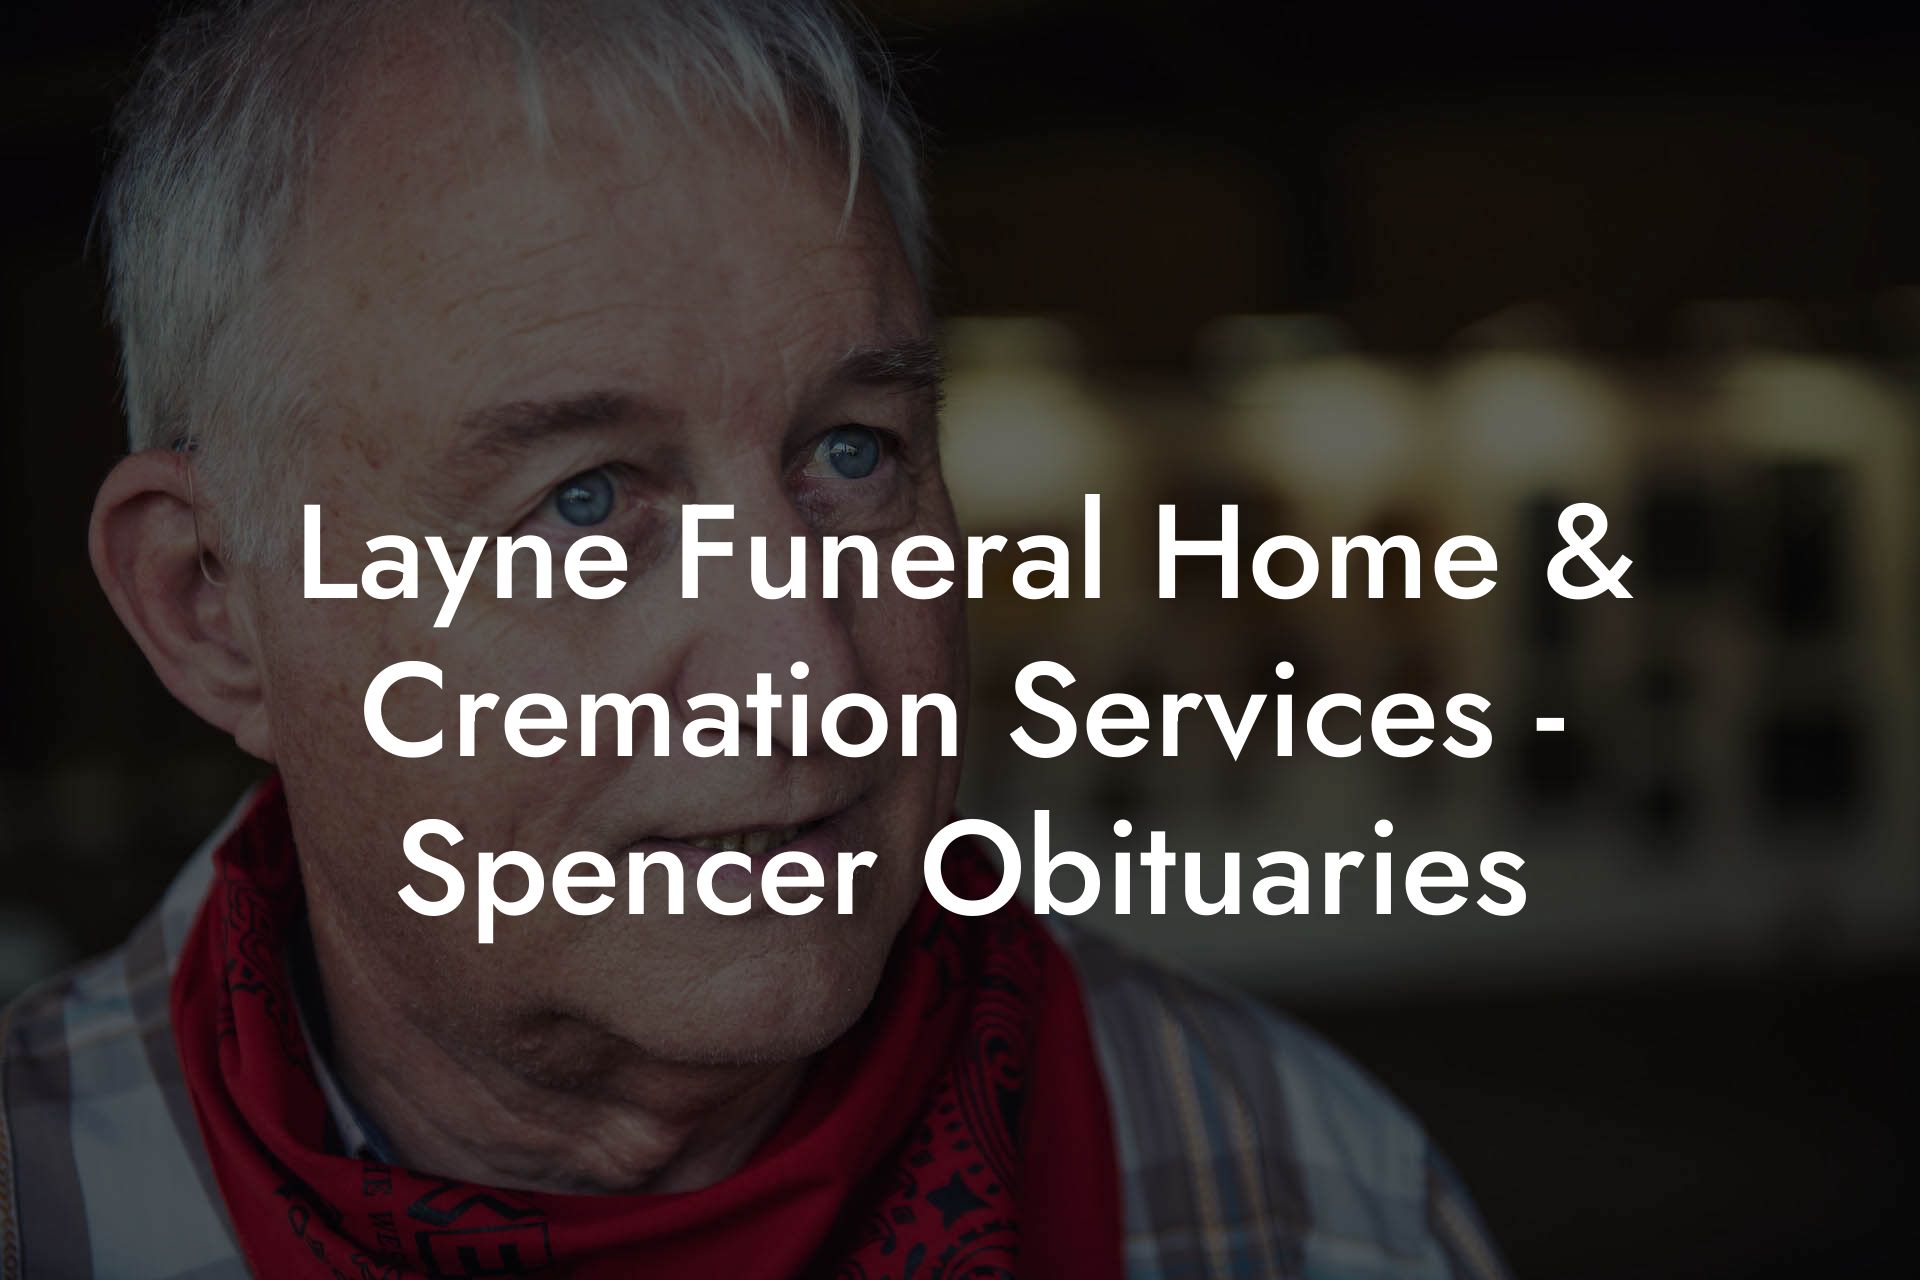 Layne Funeral Home & Cremation Services - Spencer Obituaries